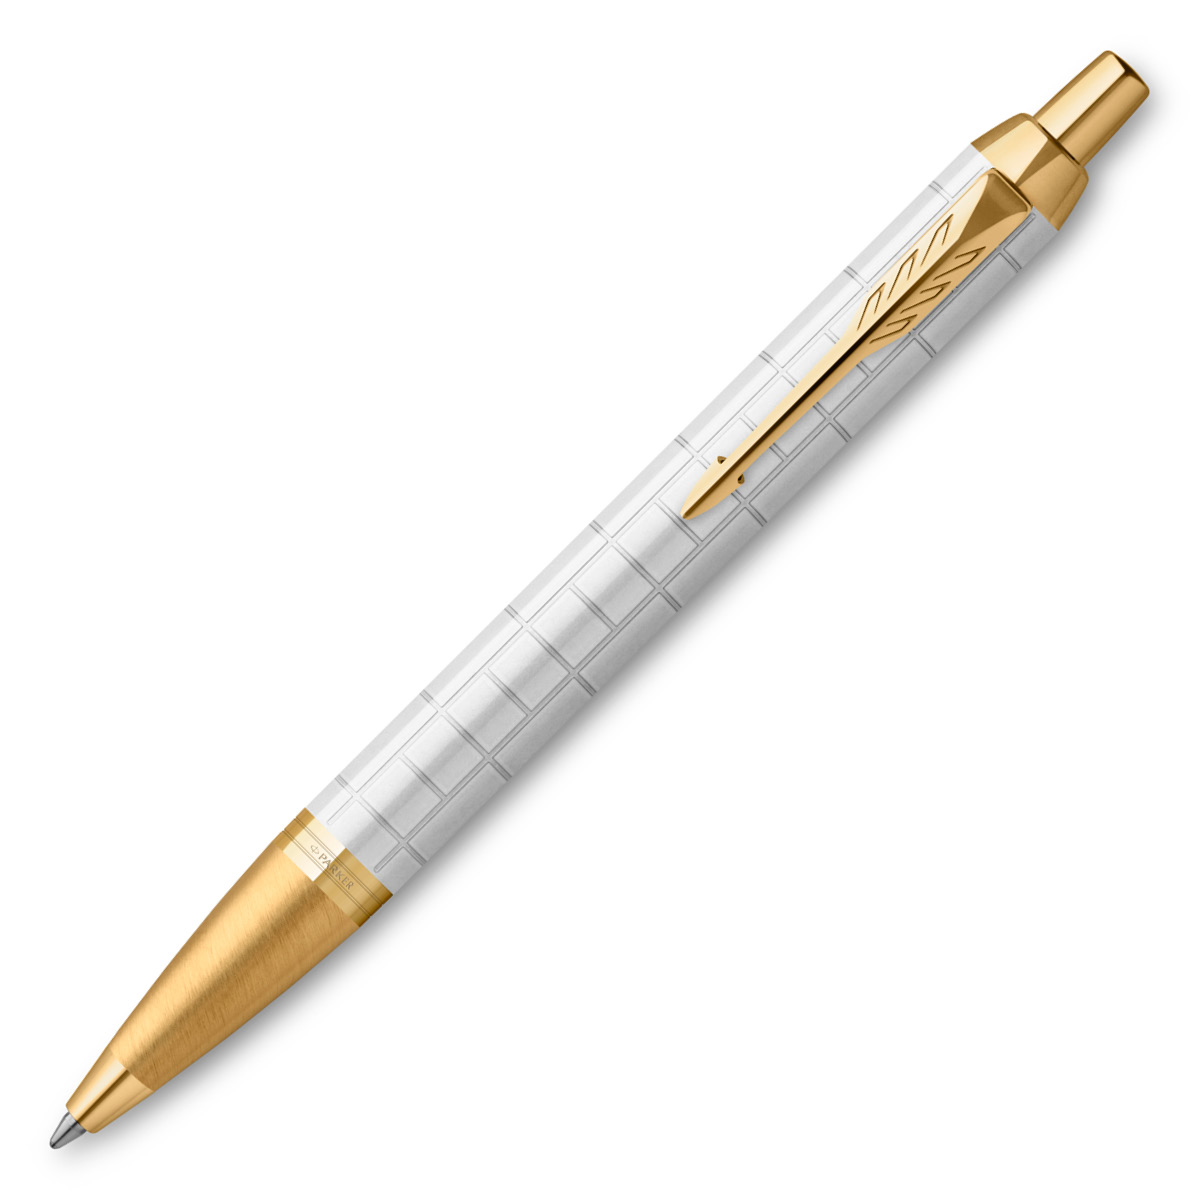 IM Premium Pearl/Gold Ballpoint pen in the group Pens / Fine Writing / Ballpoint Pens at Pen Store (112686)